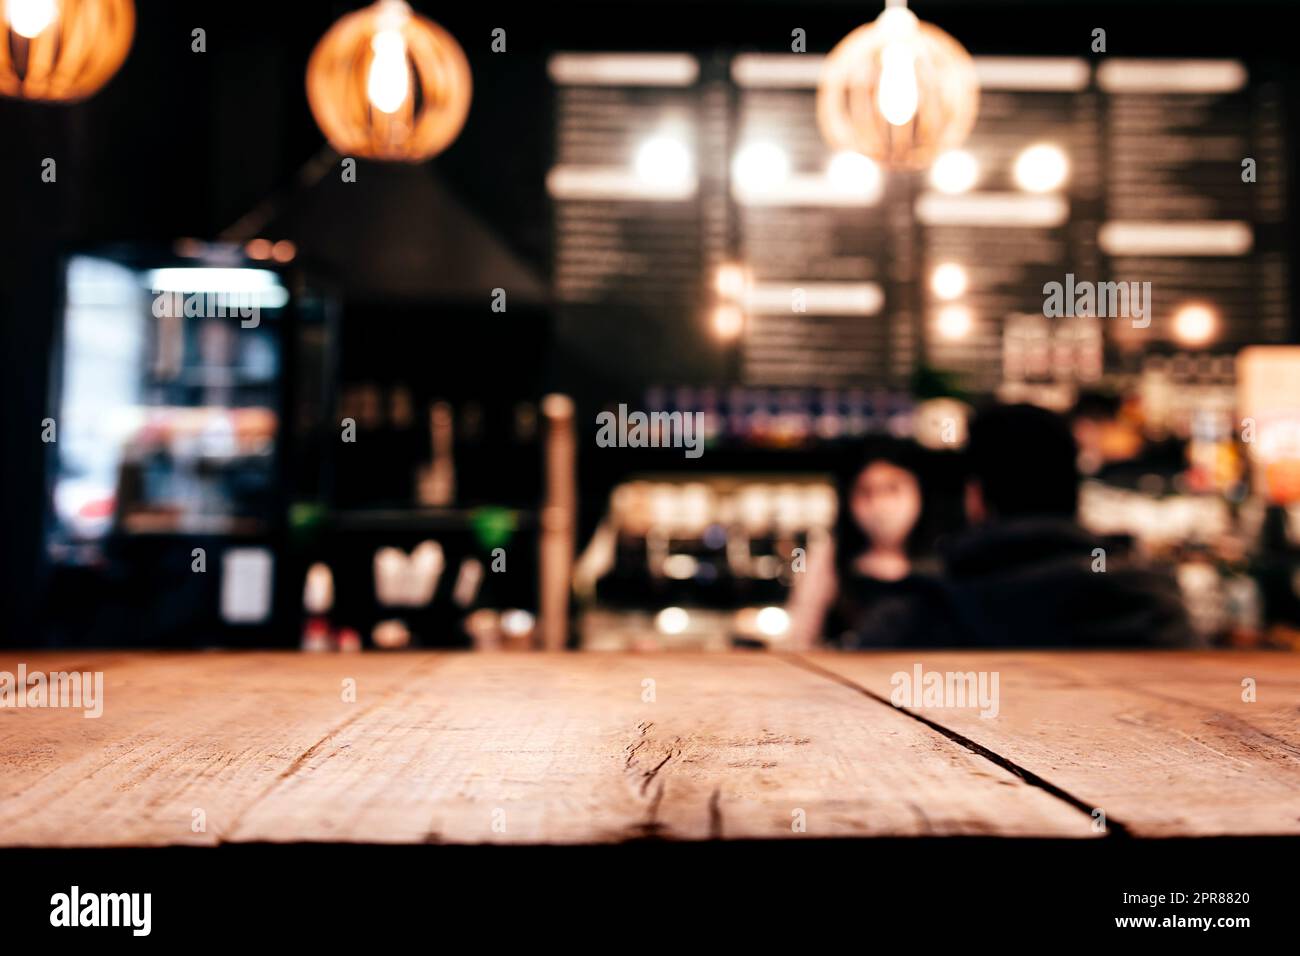 Background with wooden old deck table in front of blurred in bar or restaurant Stock Photo